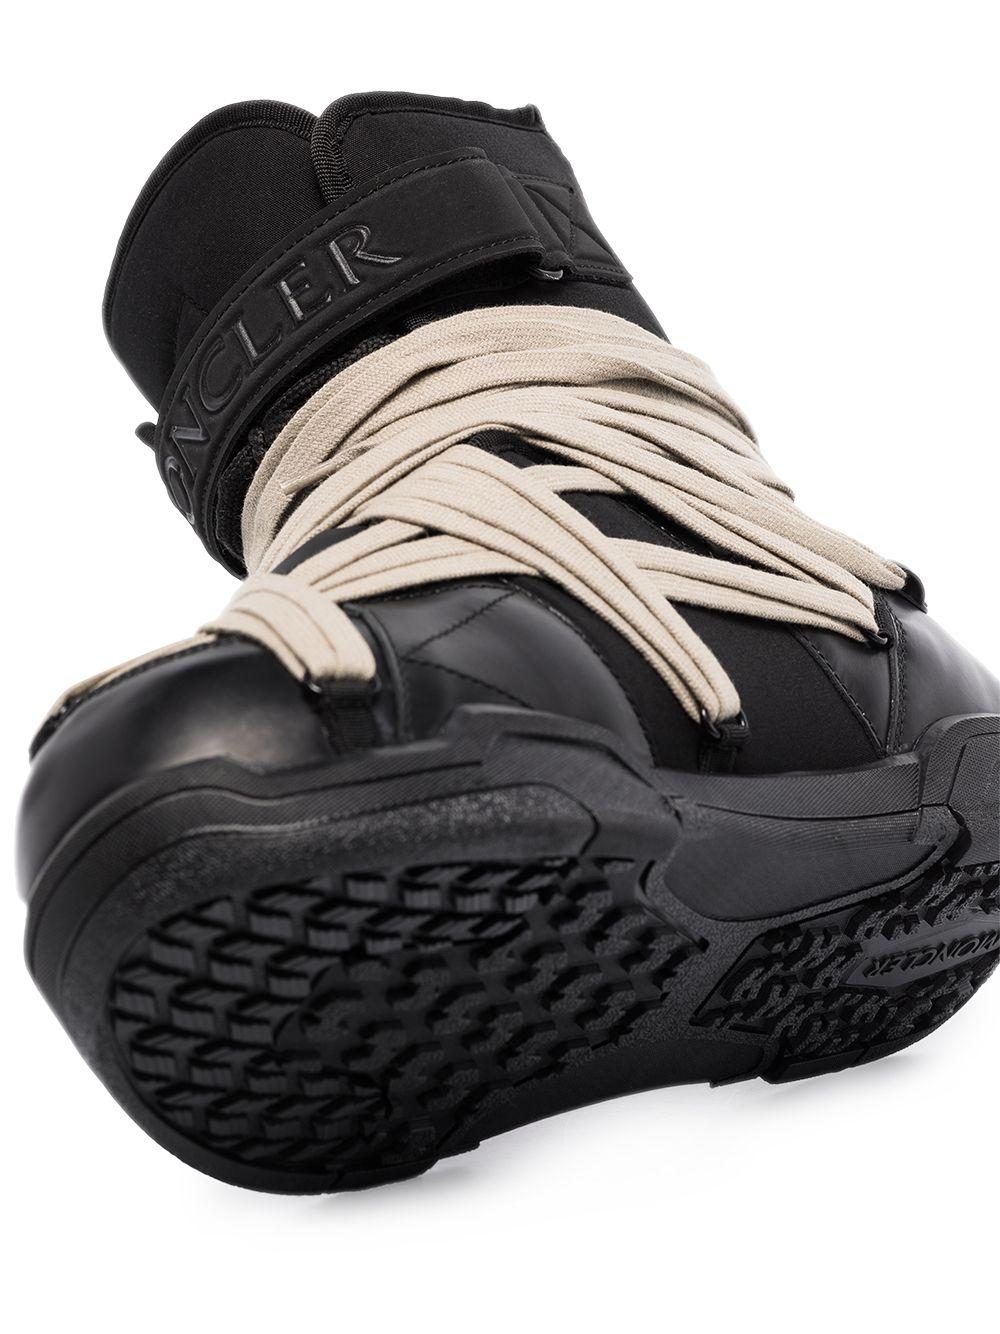 Rick Owens Leather X Moncler Chunky Lace-up Boots in Black for Men | Lyst